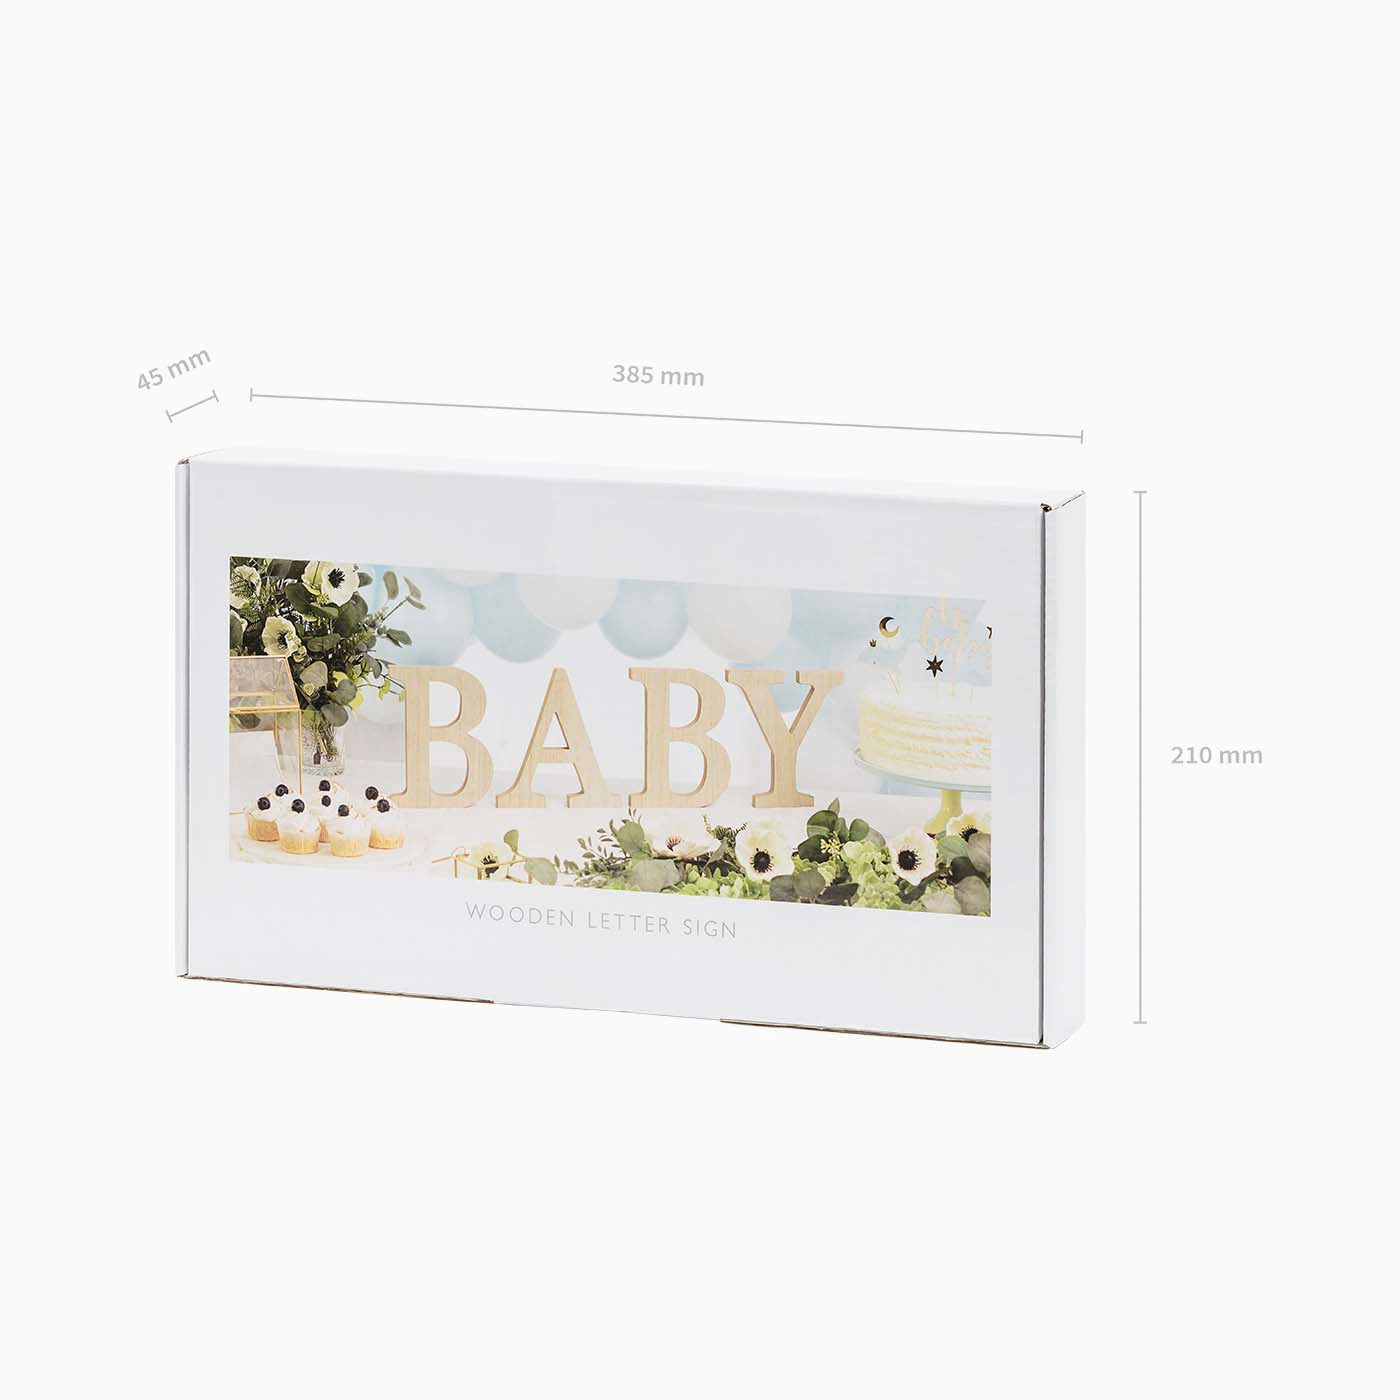 Large wooden poster "Baby"